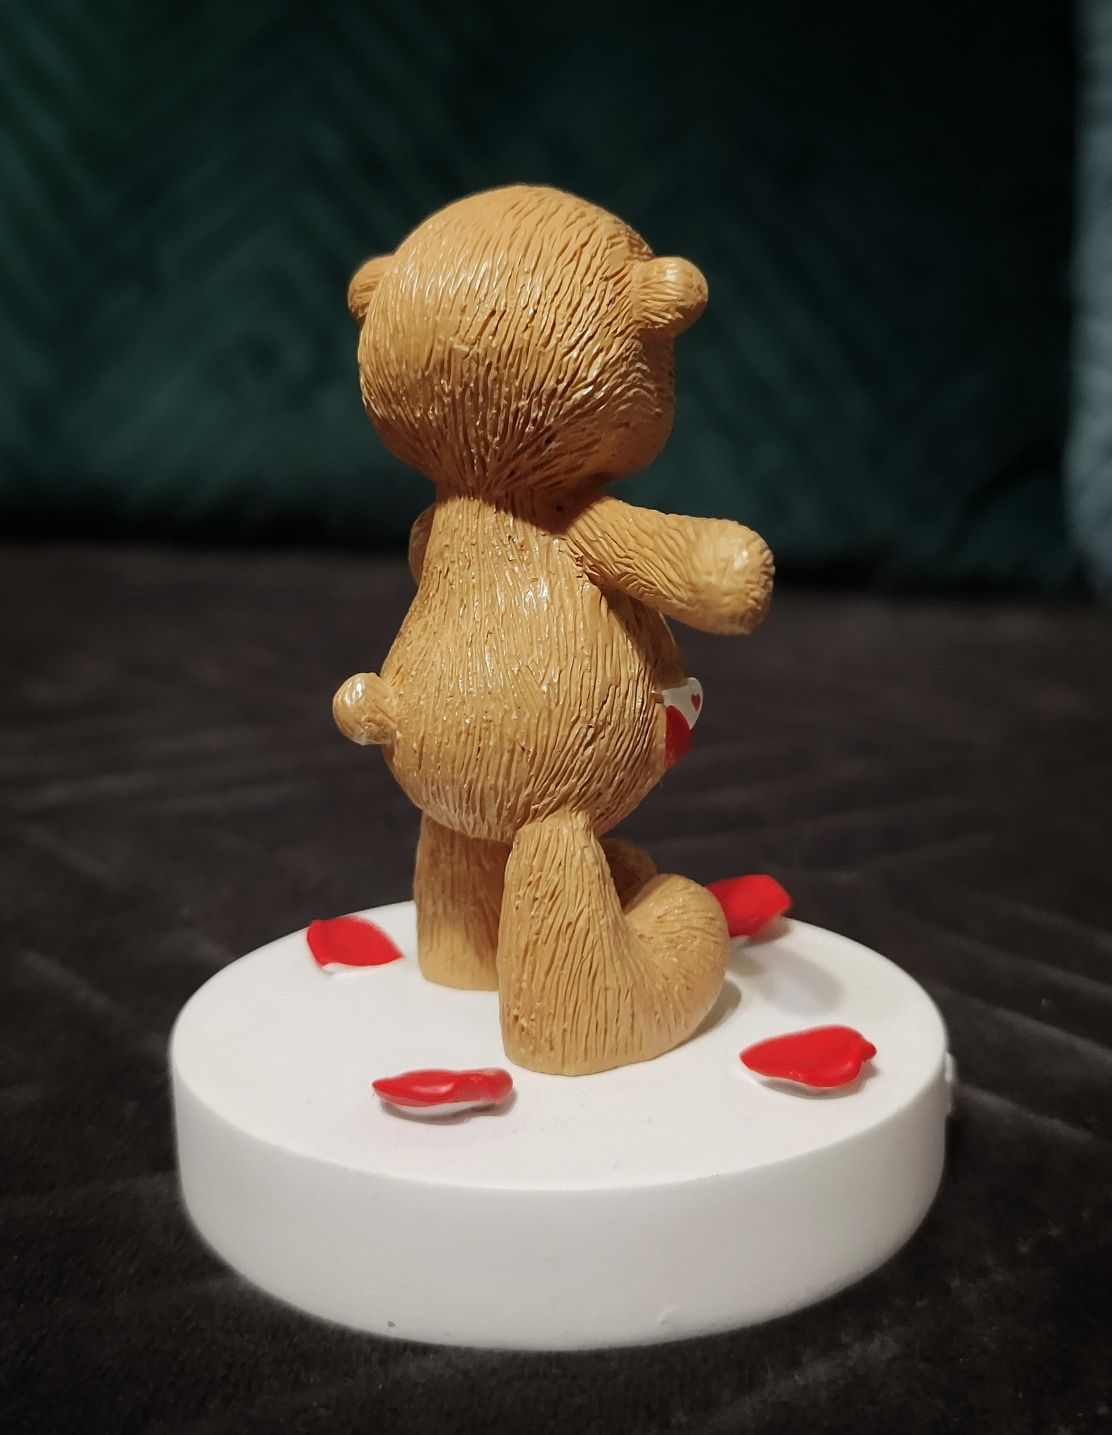 Figurka Miś / Poppin / The Little Pocket Bear / With love